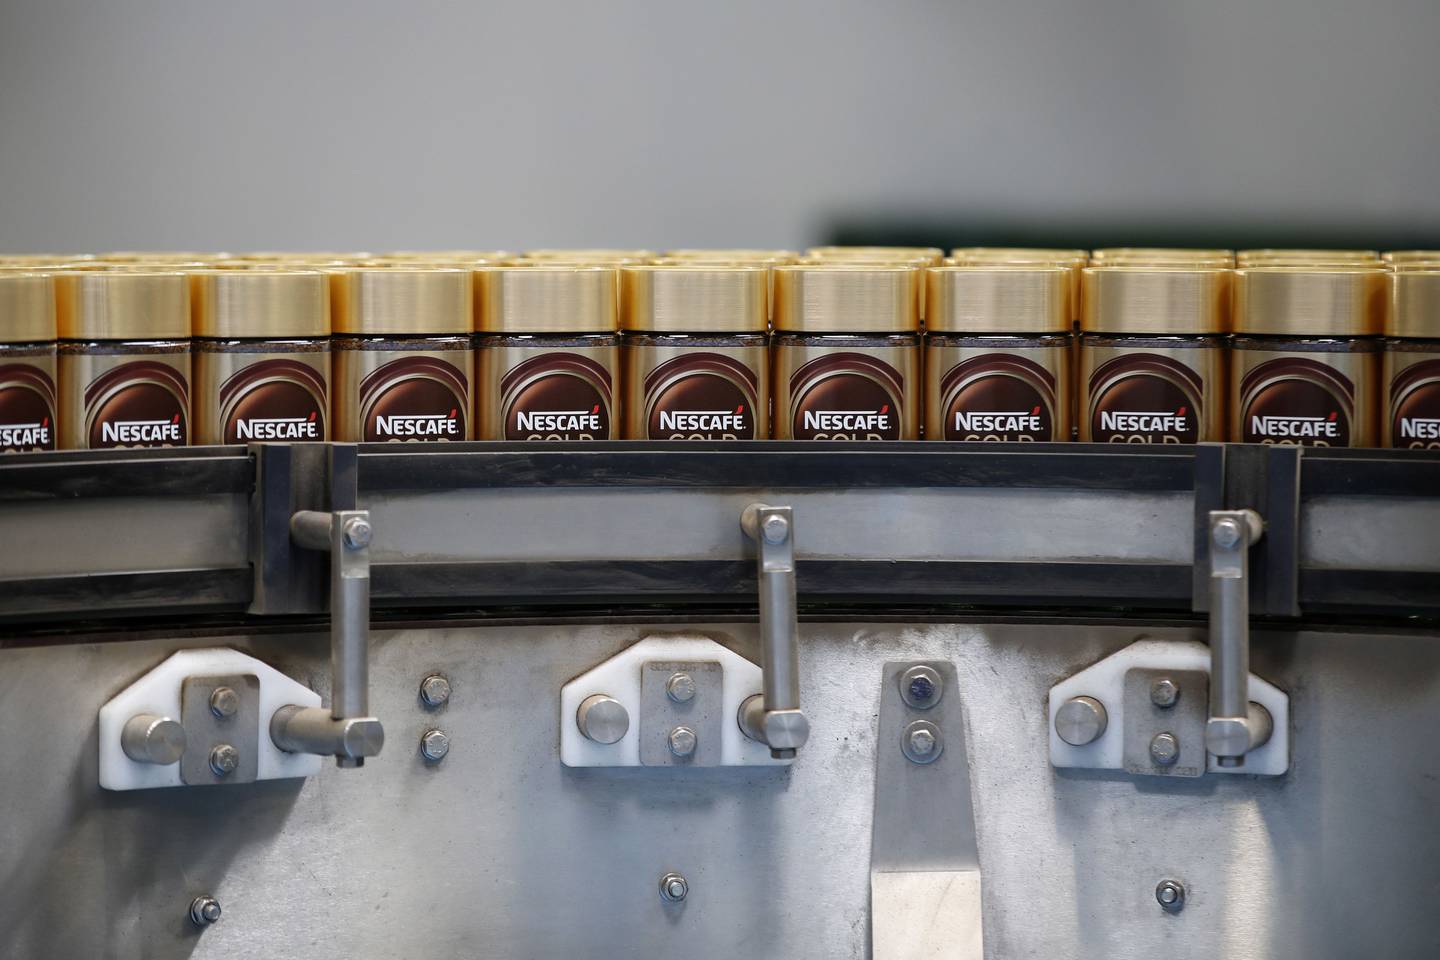 Jars of Nescafe Gold instant coffee granules move along the production line at Nestle SA's Nescafe plant in Orbe, Switzerland, on Thursday, May 20, 2021. Nestle SA sales grew at more than twice the rate analysts expected as the Swiss food giant sold more Nespresso capsules to people working from home and restaurants in Asia stocked up as they started reopening. Photographer: Stefan Wermuth/Bloomberg